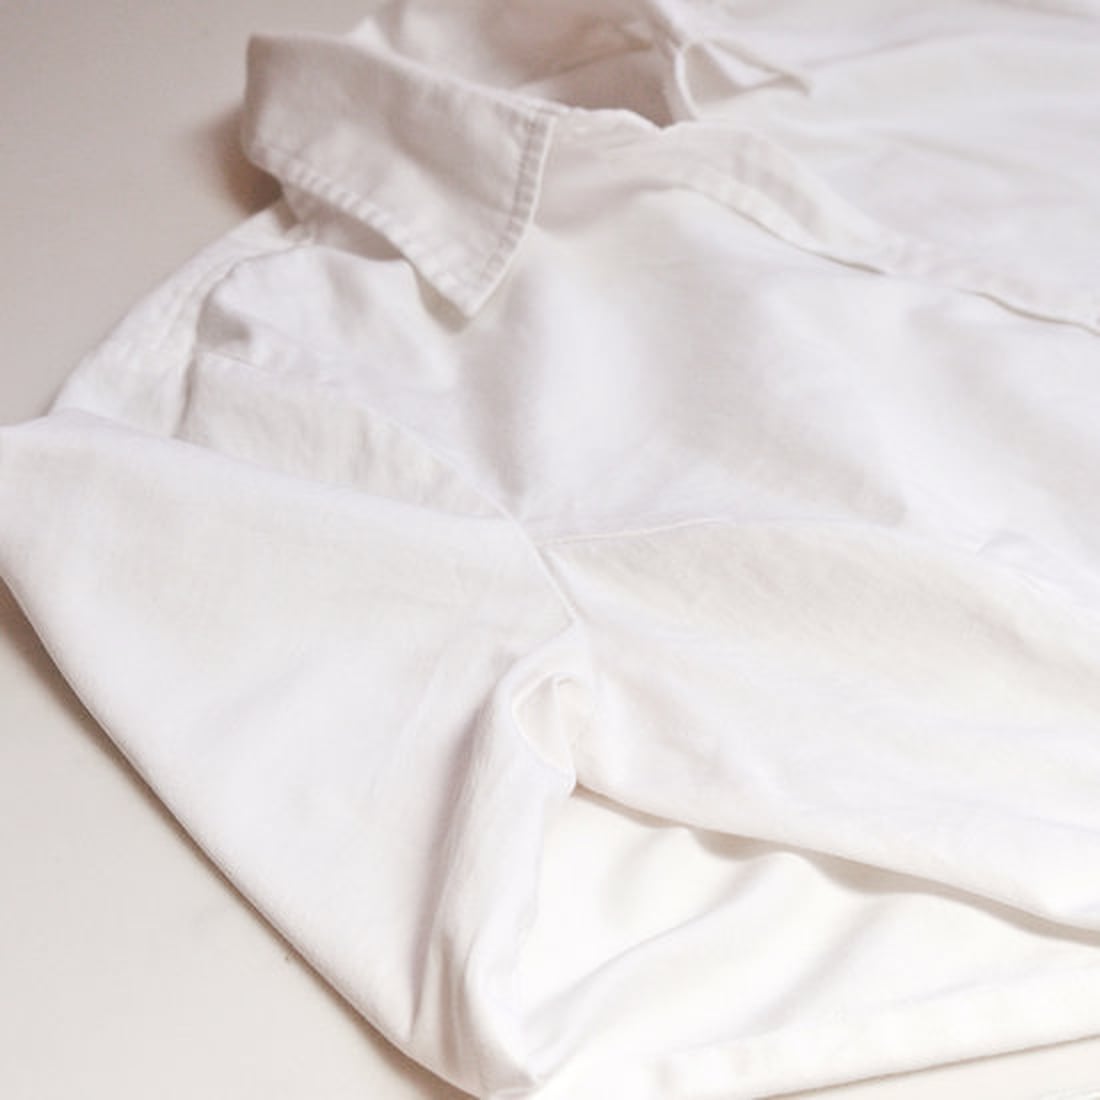 How to Remove Sweat Stains | POPSUGAR Smart Living